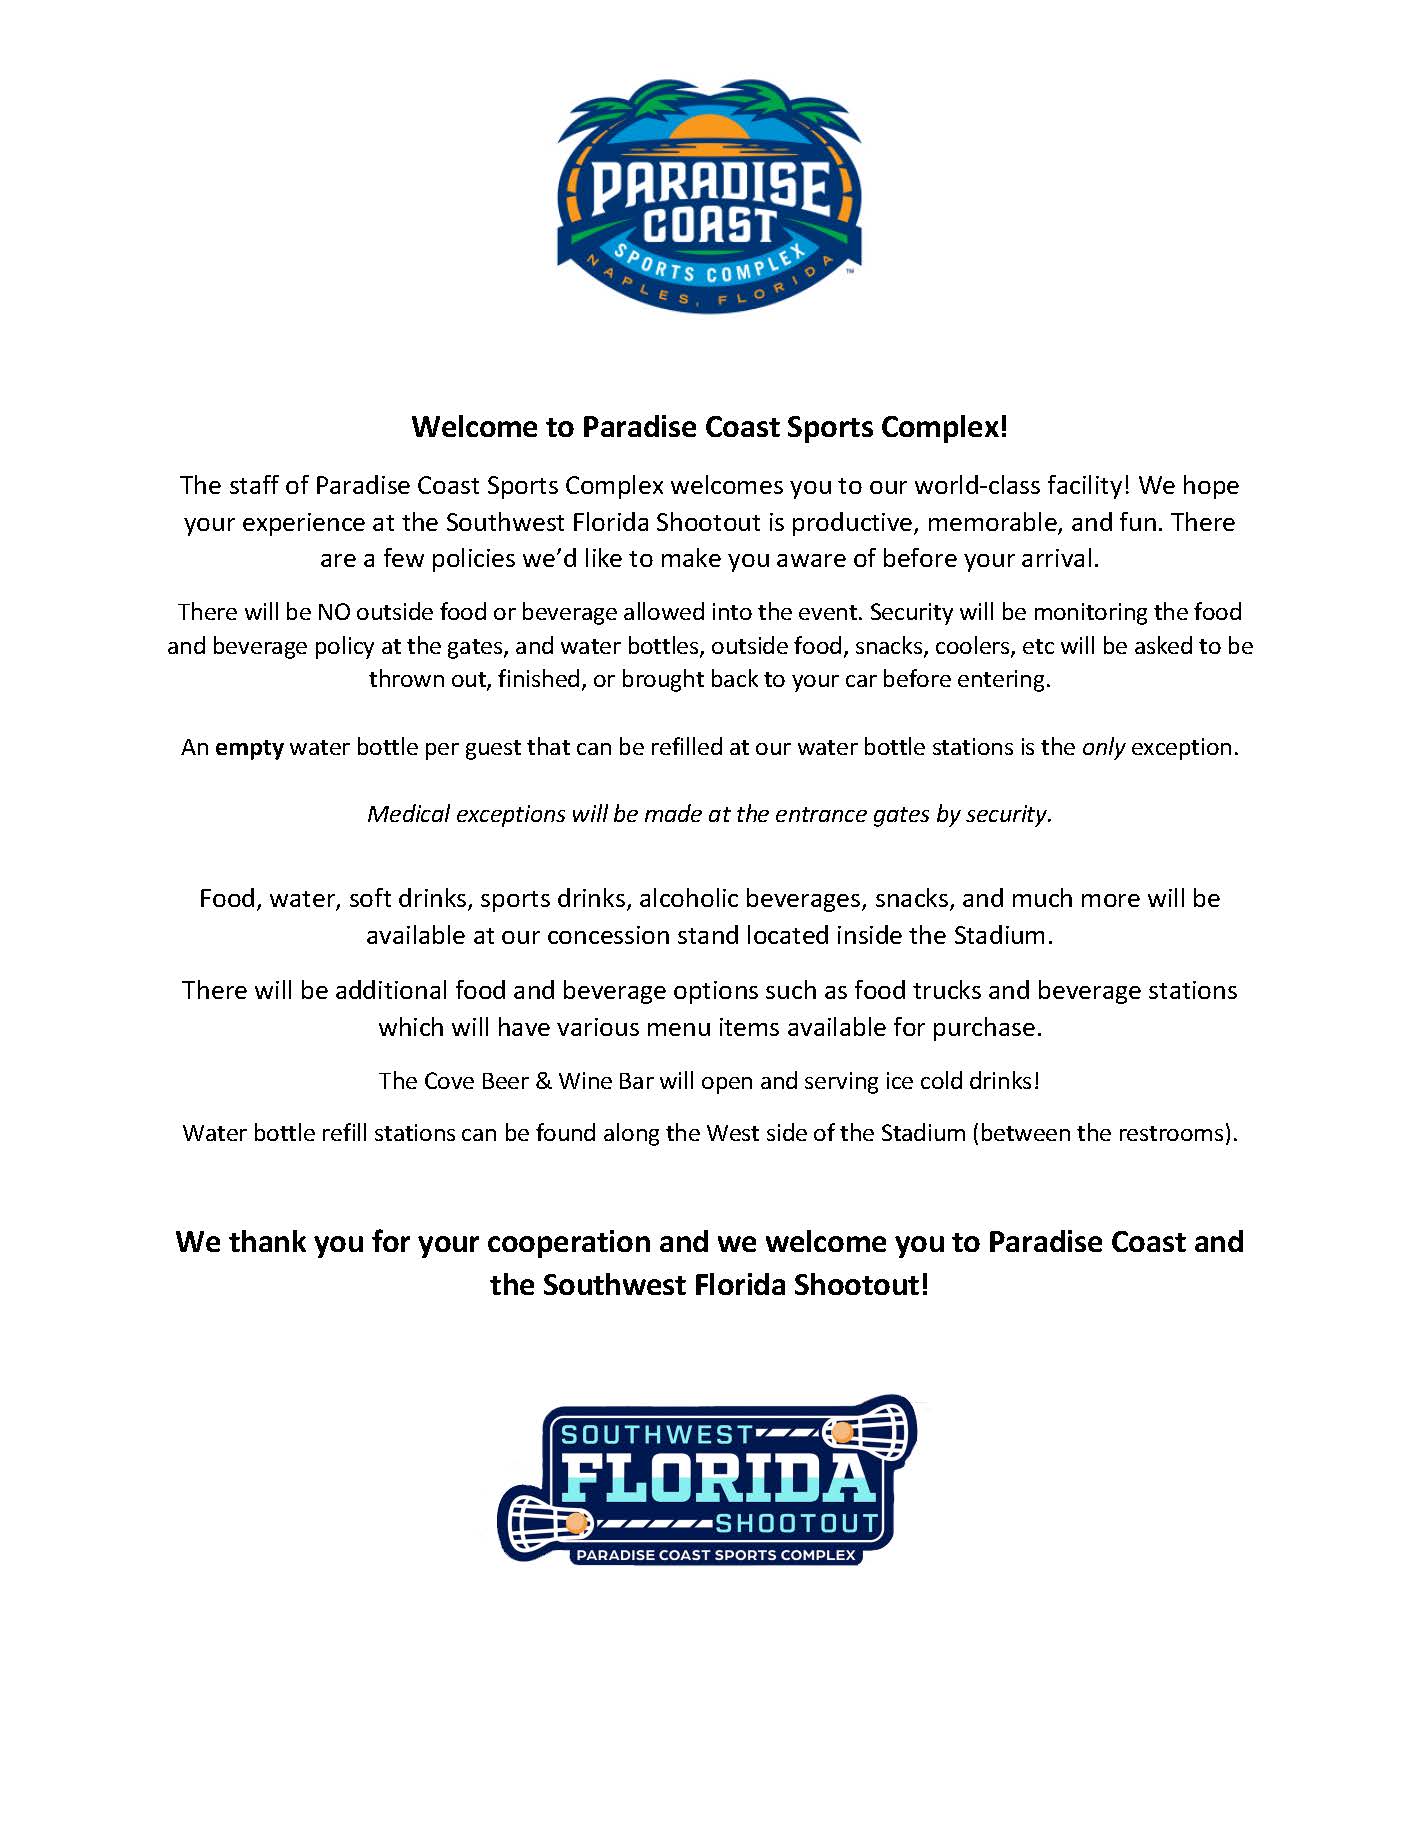 Southwest Florida Shootout Food and Bev Policy